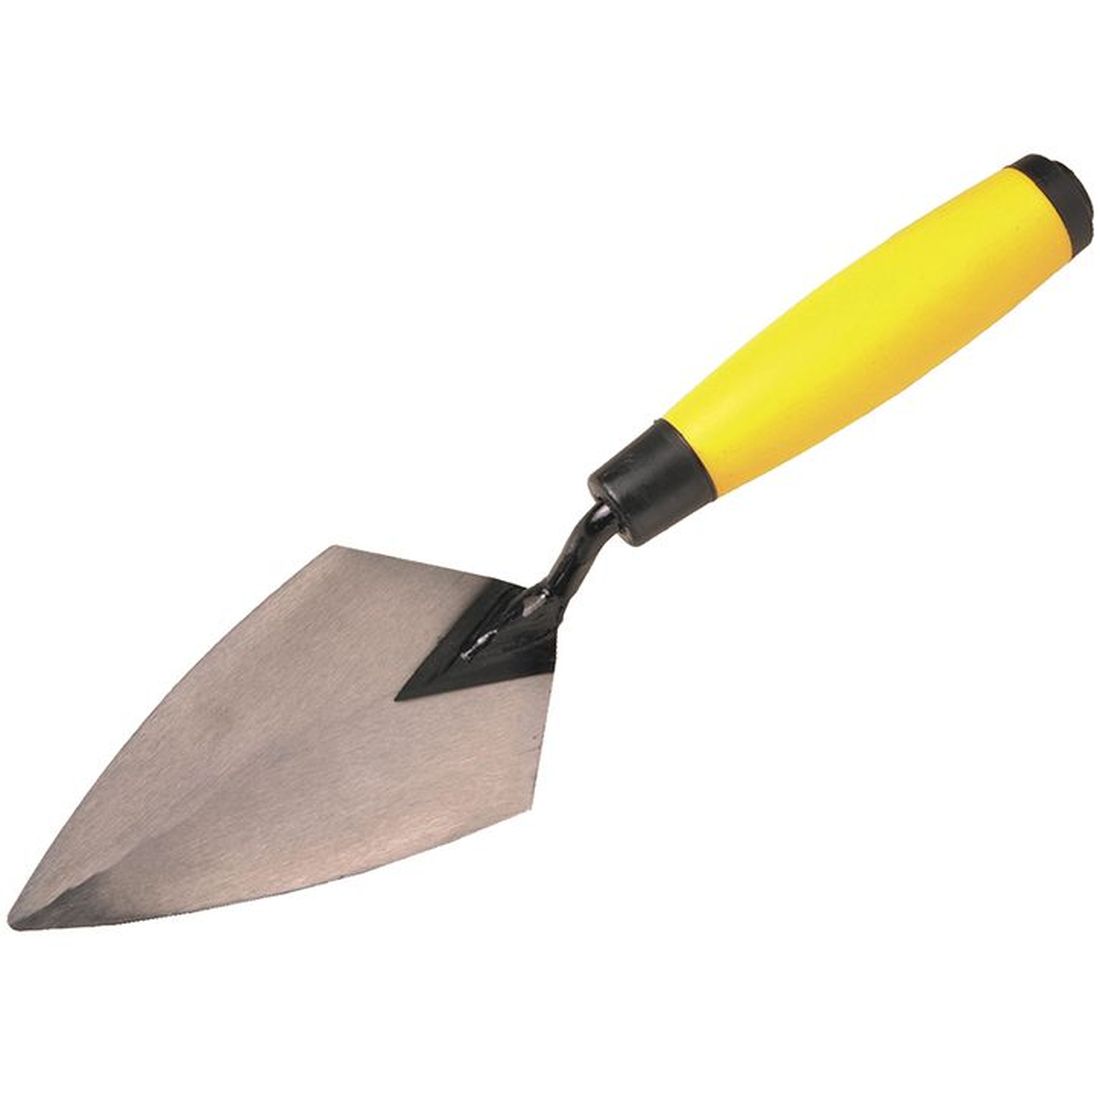 BlueSpot Tools Pointing Trowel Soft Grip Handle 150mm (6in)                                    